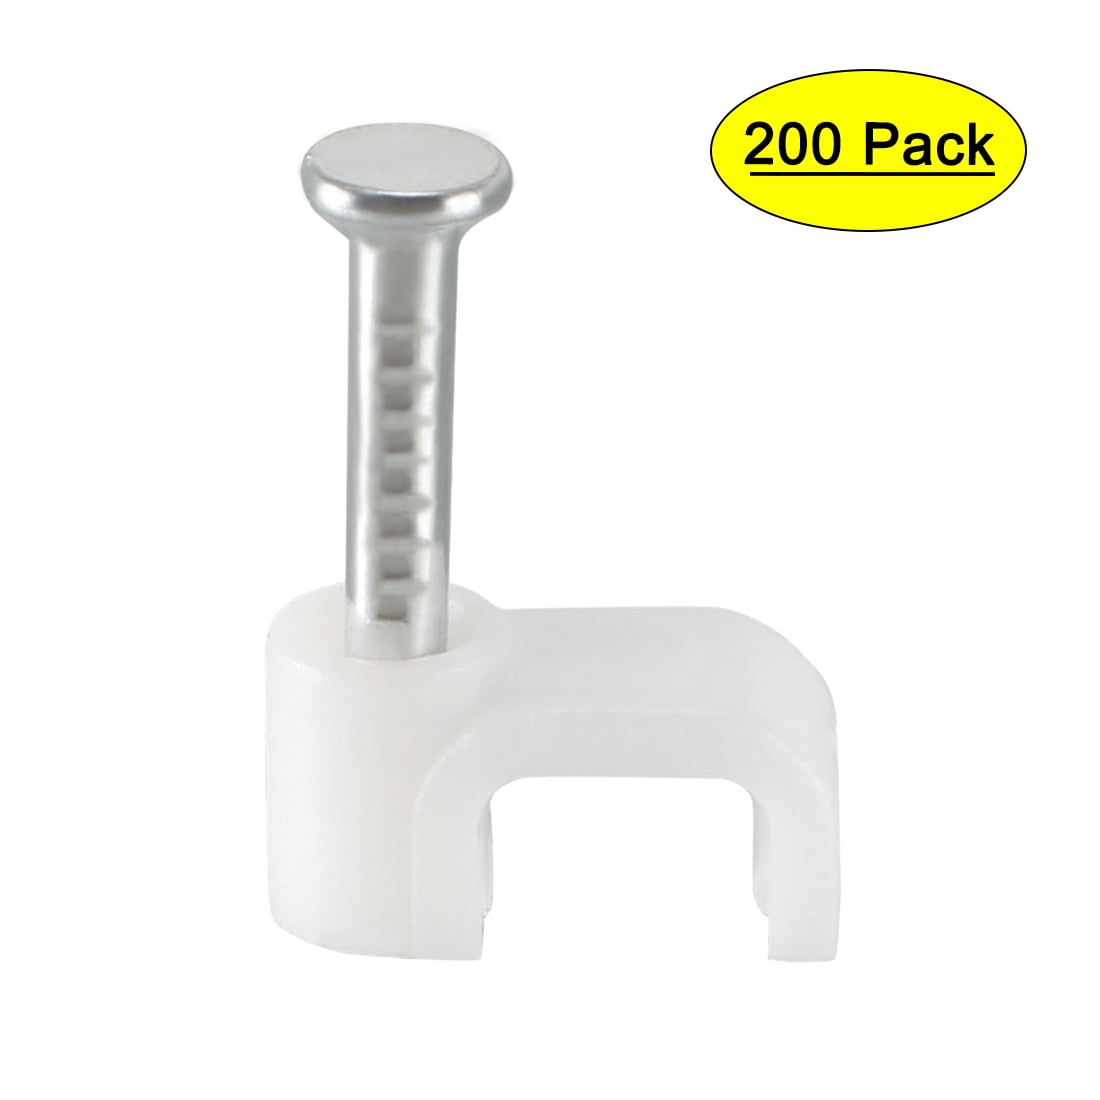 86 PC WHITE PLASTIC CABLE CLIPS NAILS TV AERIAL CABLES WALL MOUNTING 9MM 